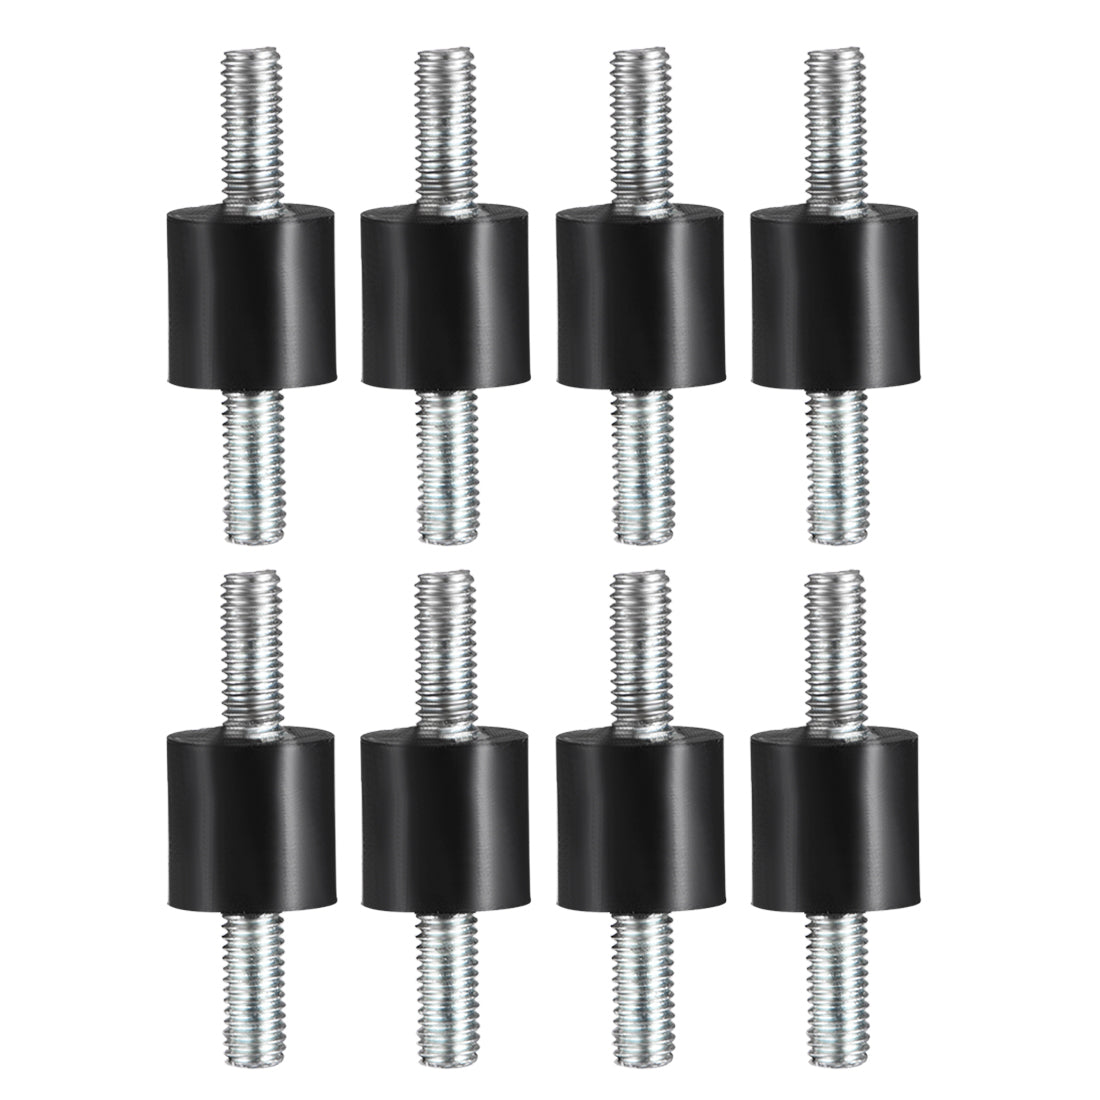 uxcell Uxcell Rubber Mounts,Vibration Isolators,with Studs 8pcs